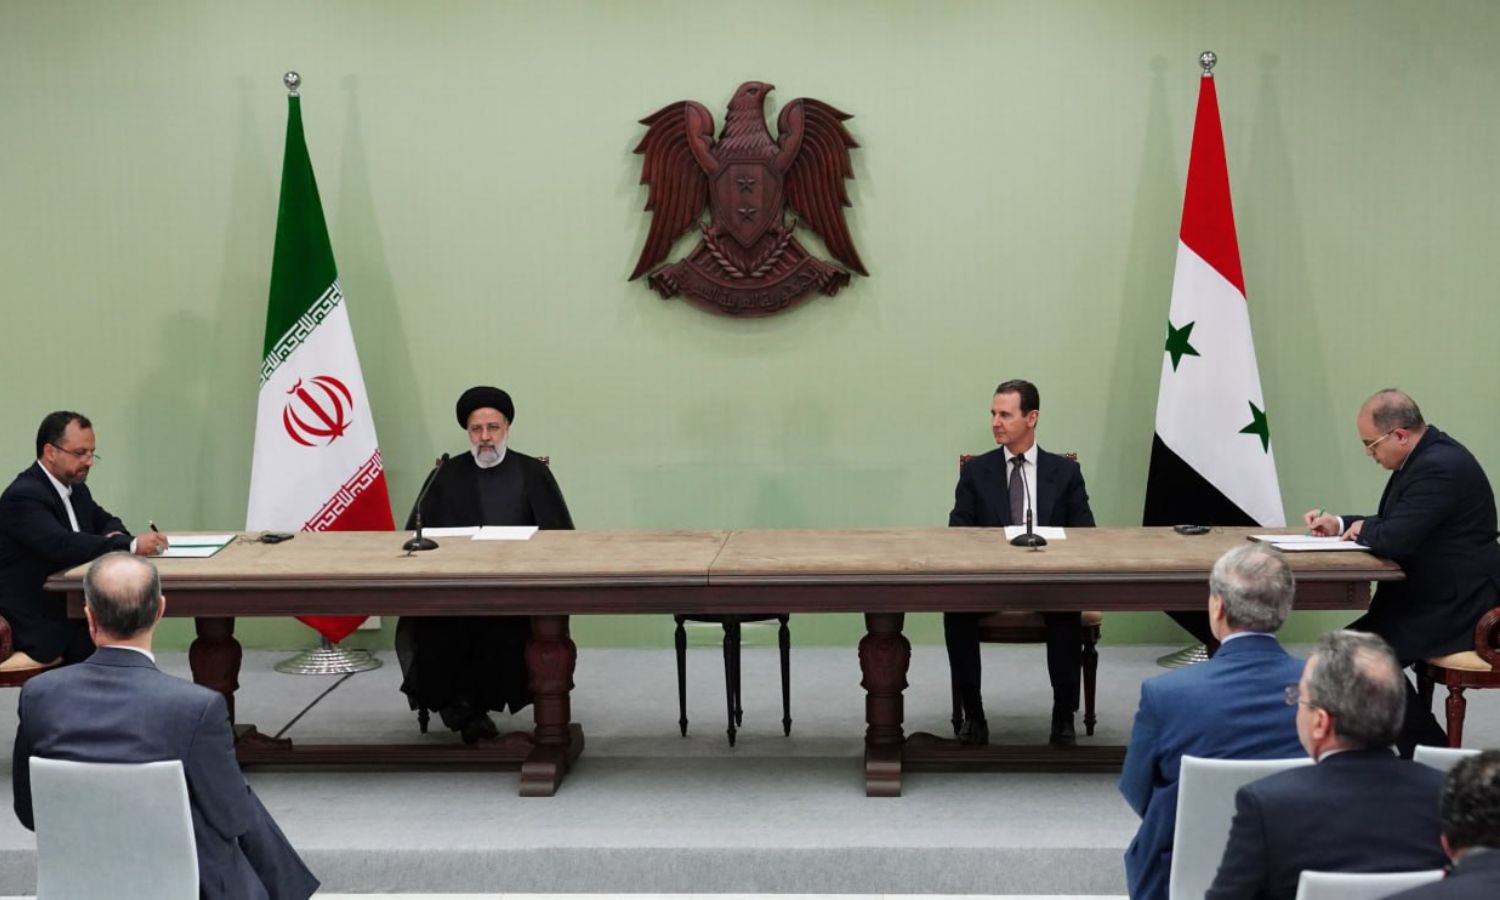 Signing memorandums of understanding between the Syrian regime and Iran, in the presence of al-Assad and Iranian President Ibrahim Raisi in Damascus - May 3, 2023 (Syrian Presidency)